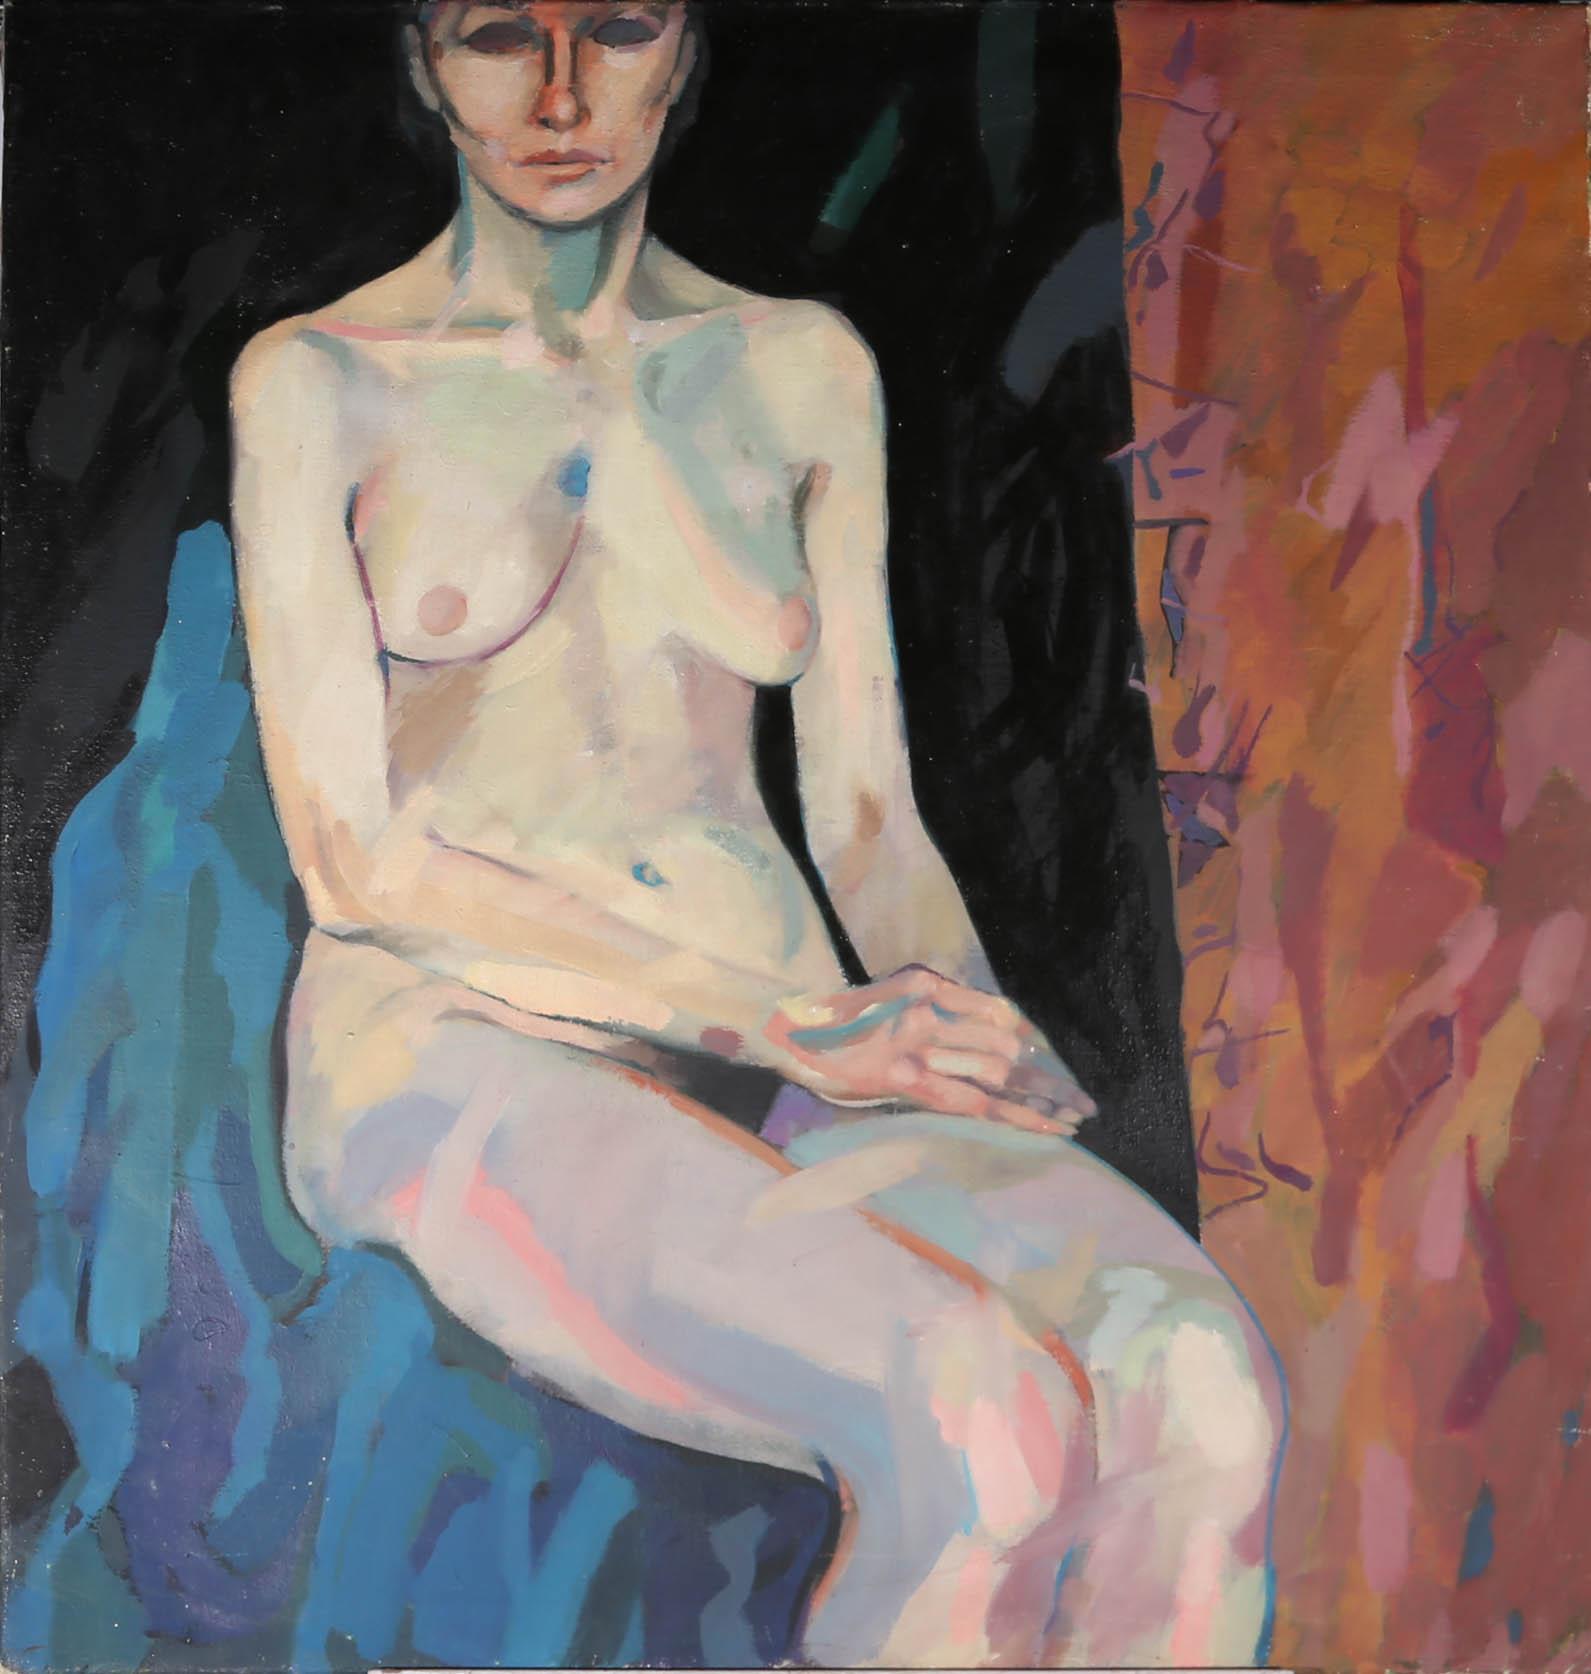 A striking nude, maybe one of the most impressive portraits from the collection, this 20th Century life study shows a seated woman with pastel toned skin sitting against a dramatic black ground. The painting shows a darker side to the artist's